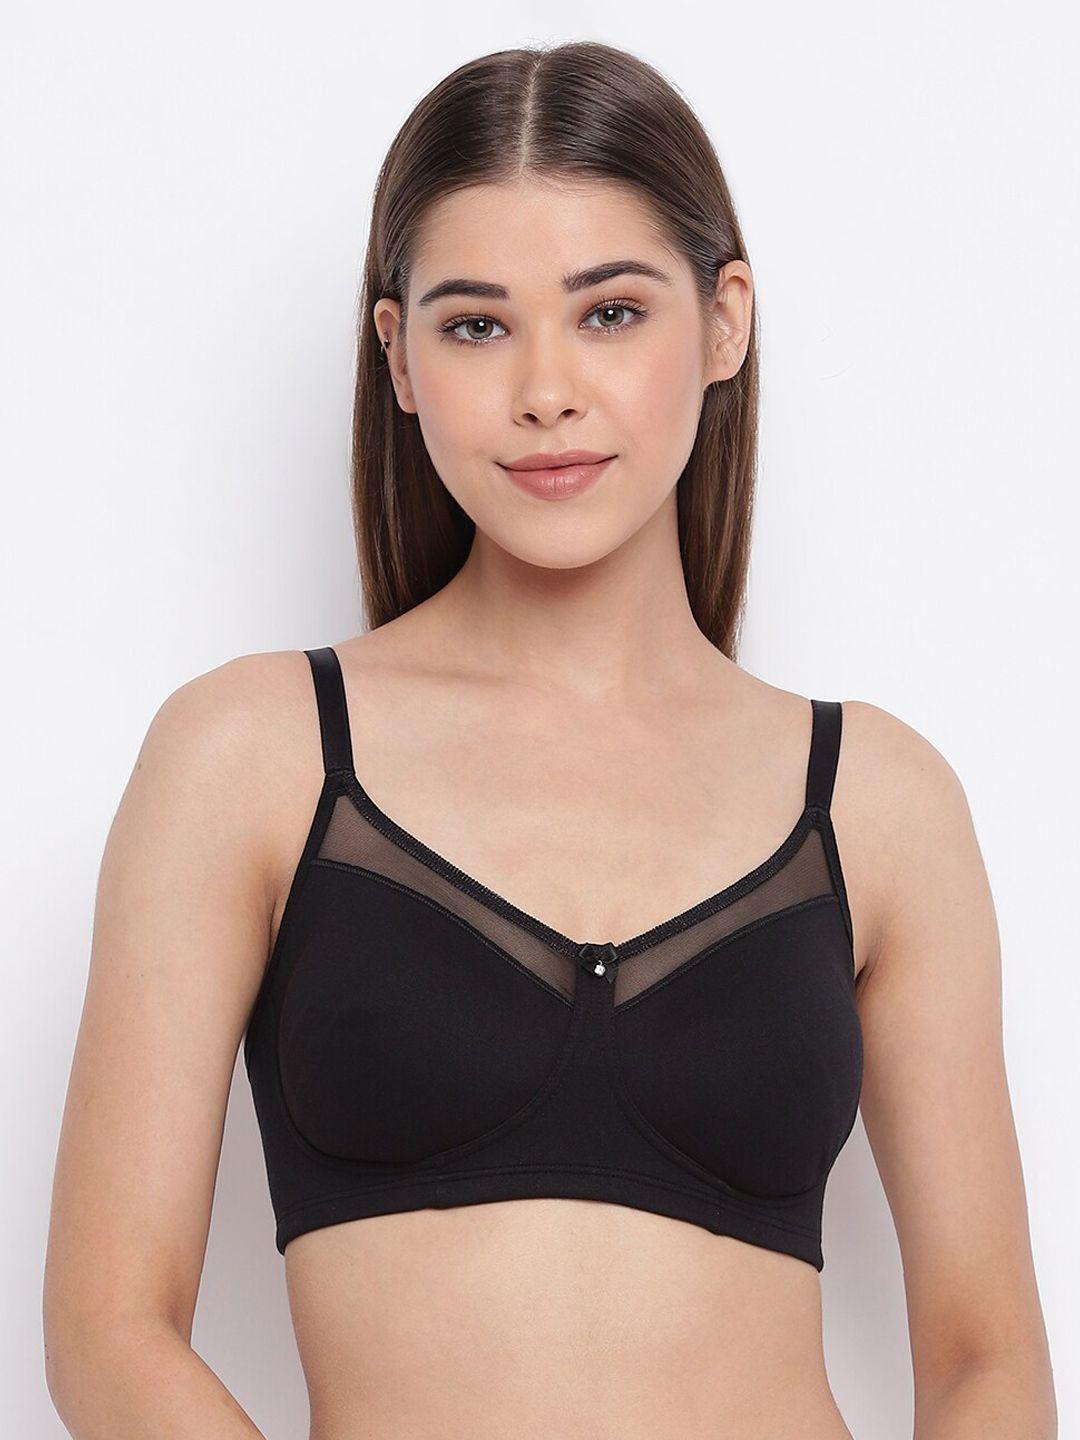 enamor-black-non-wired-non-padded-full-coverage-everyday-tshirt-bra-a030